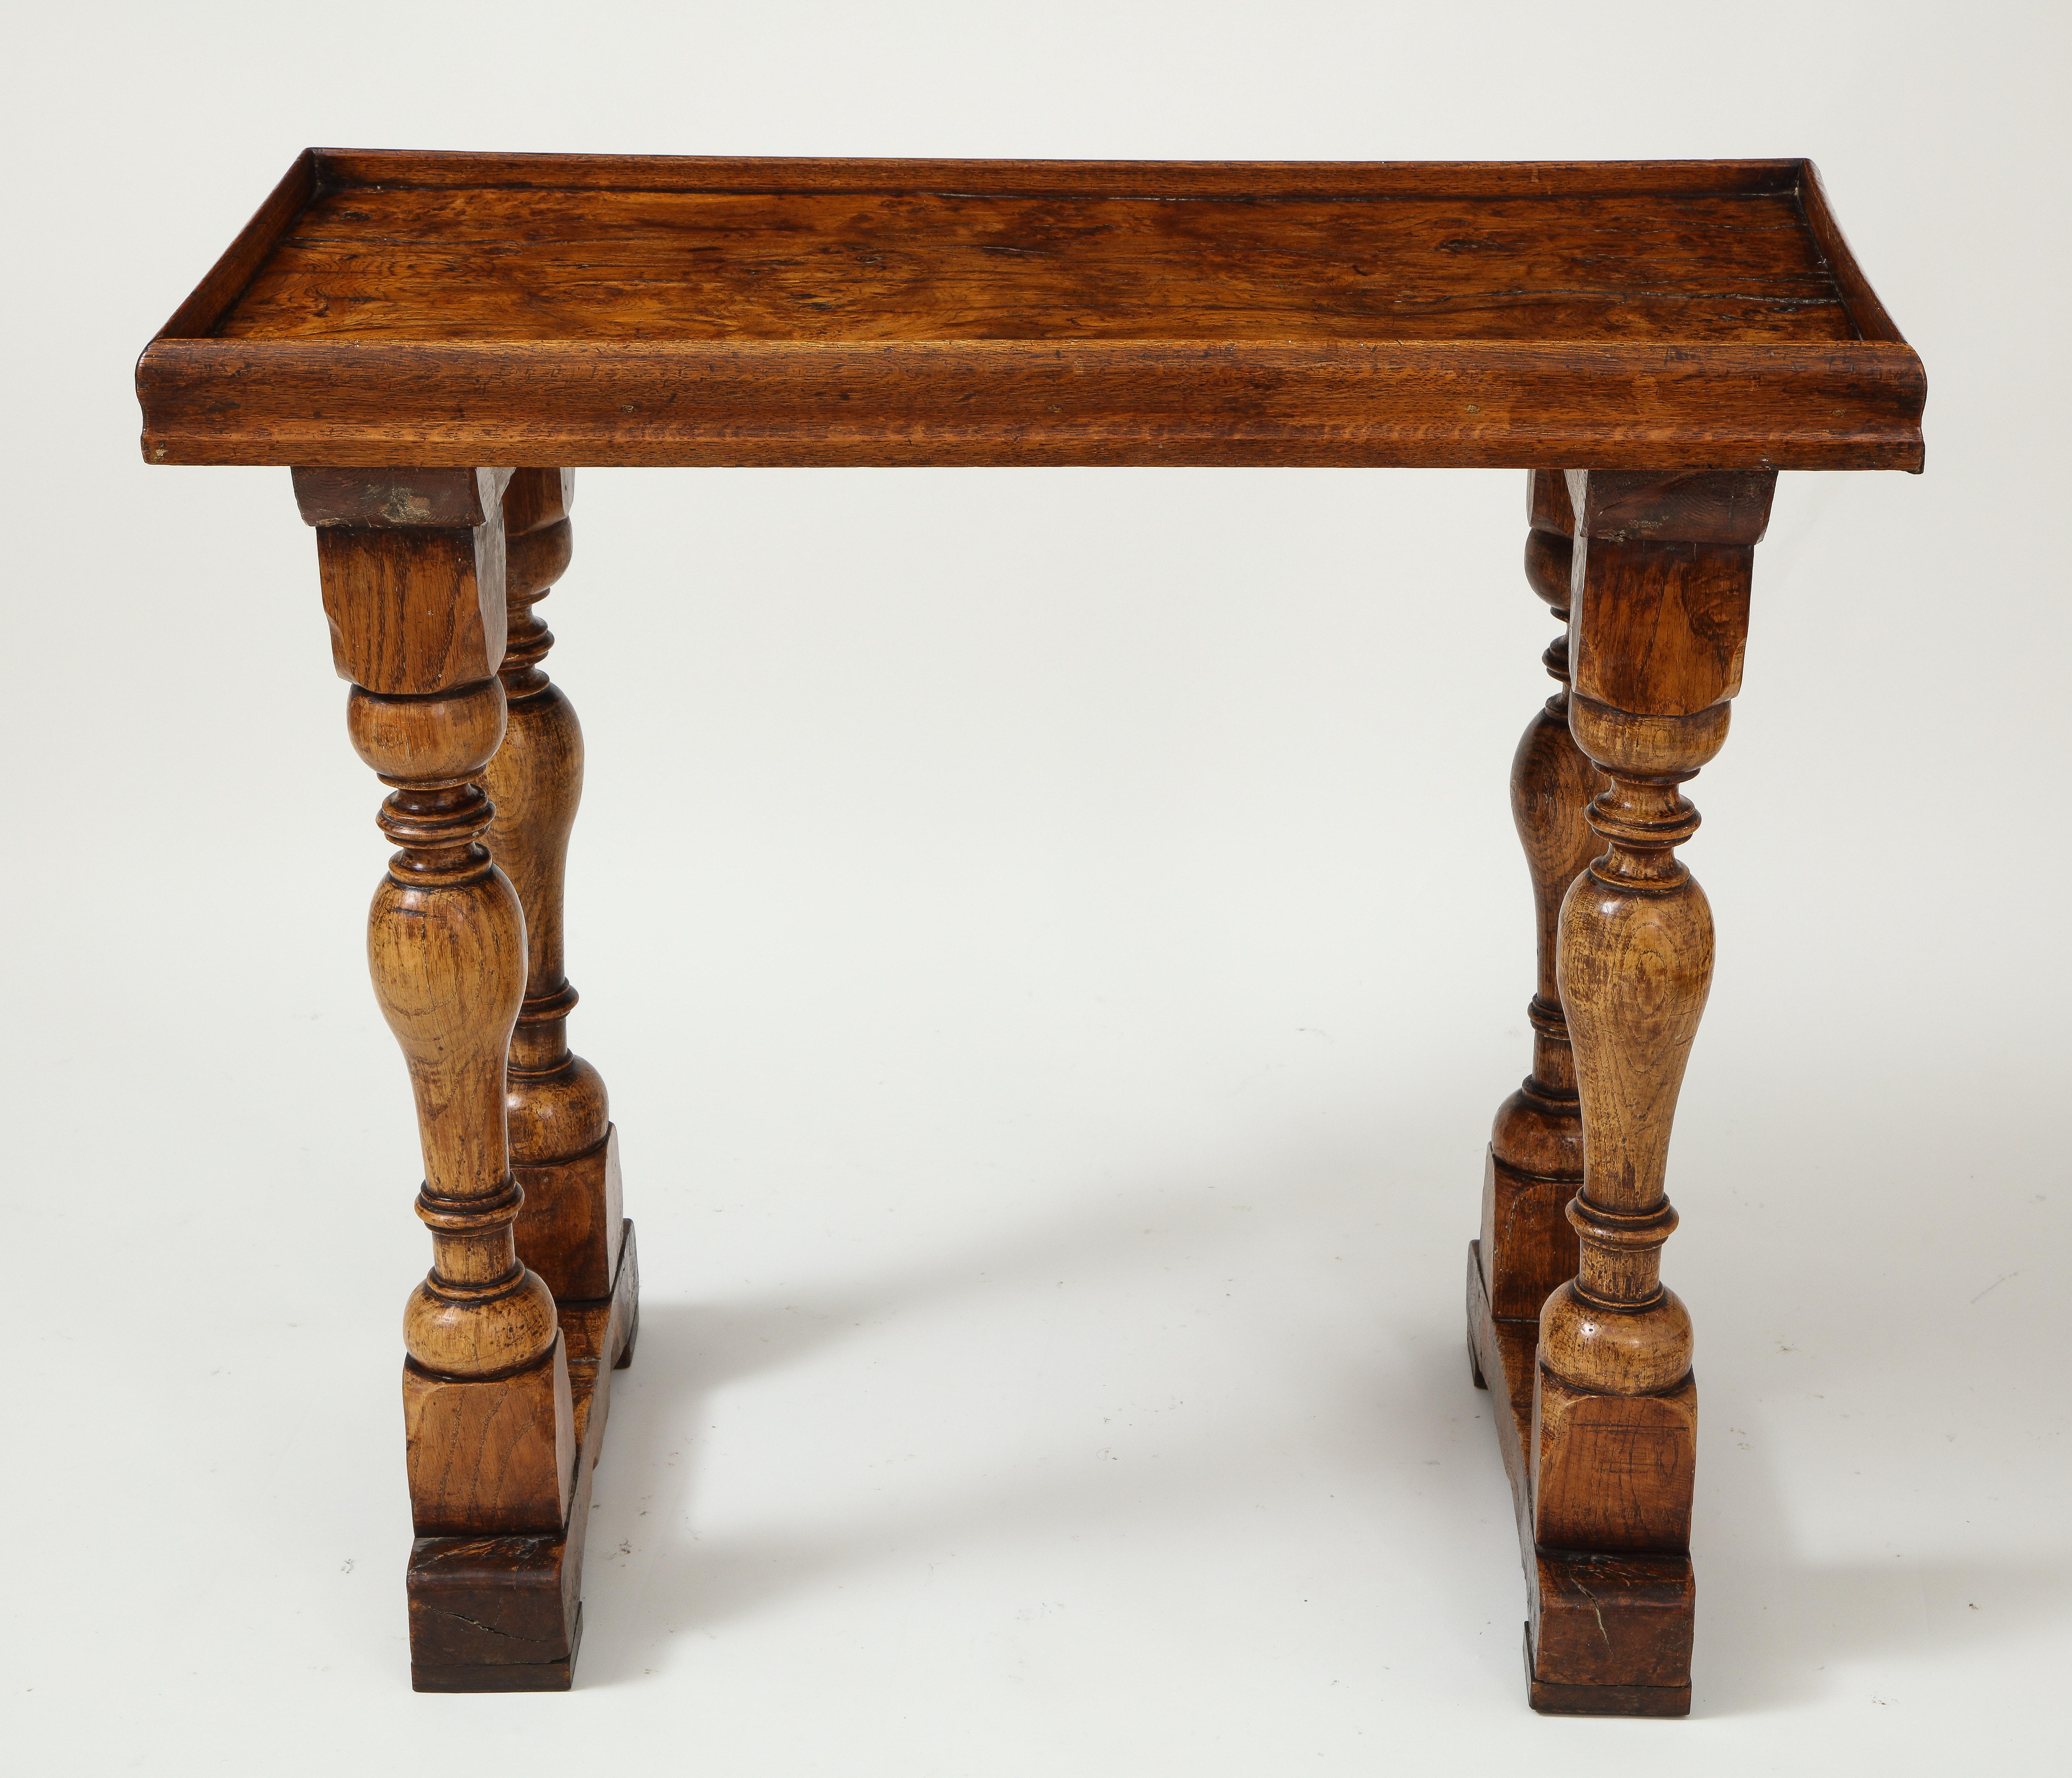 This Jacobean Revival piece incorporates 17th century elements, including the beautifully patinated, single board top. Raised on baluster-form supports joined by stretchers.